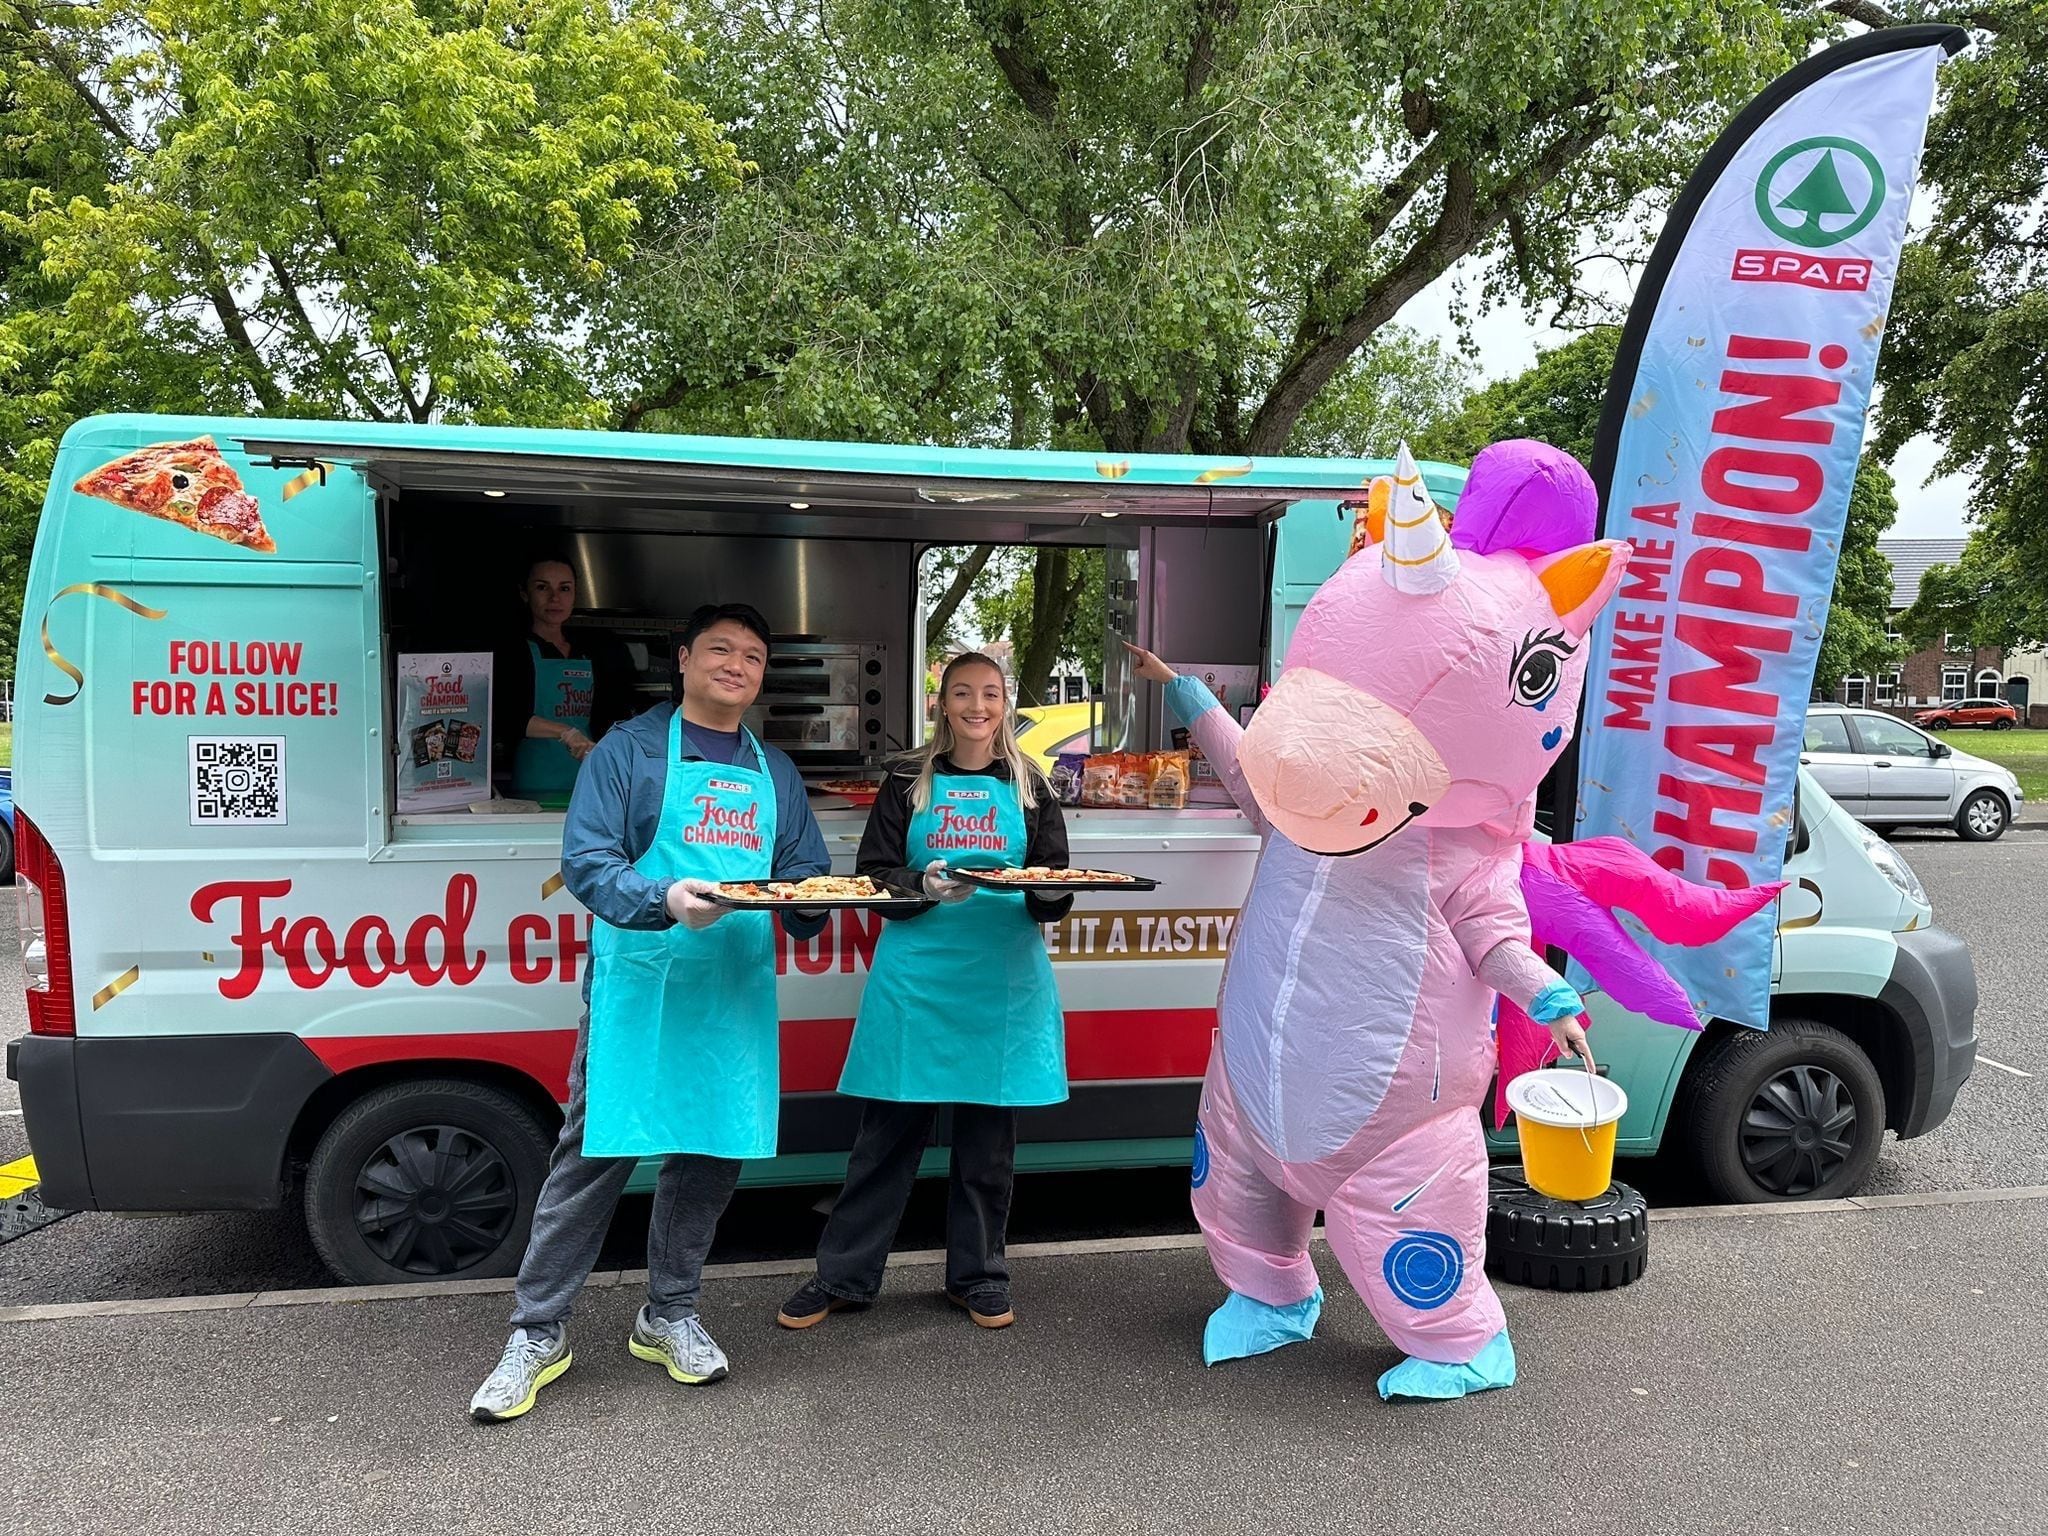 Shoppers can win prizes as food truck comes to Wolverhampton store